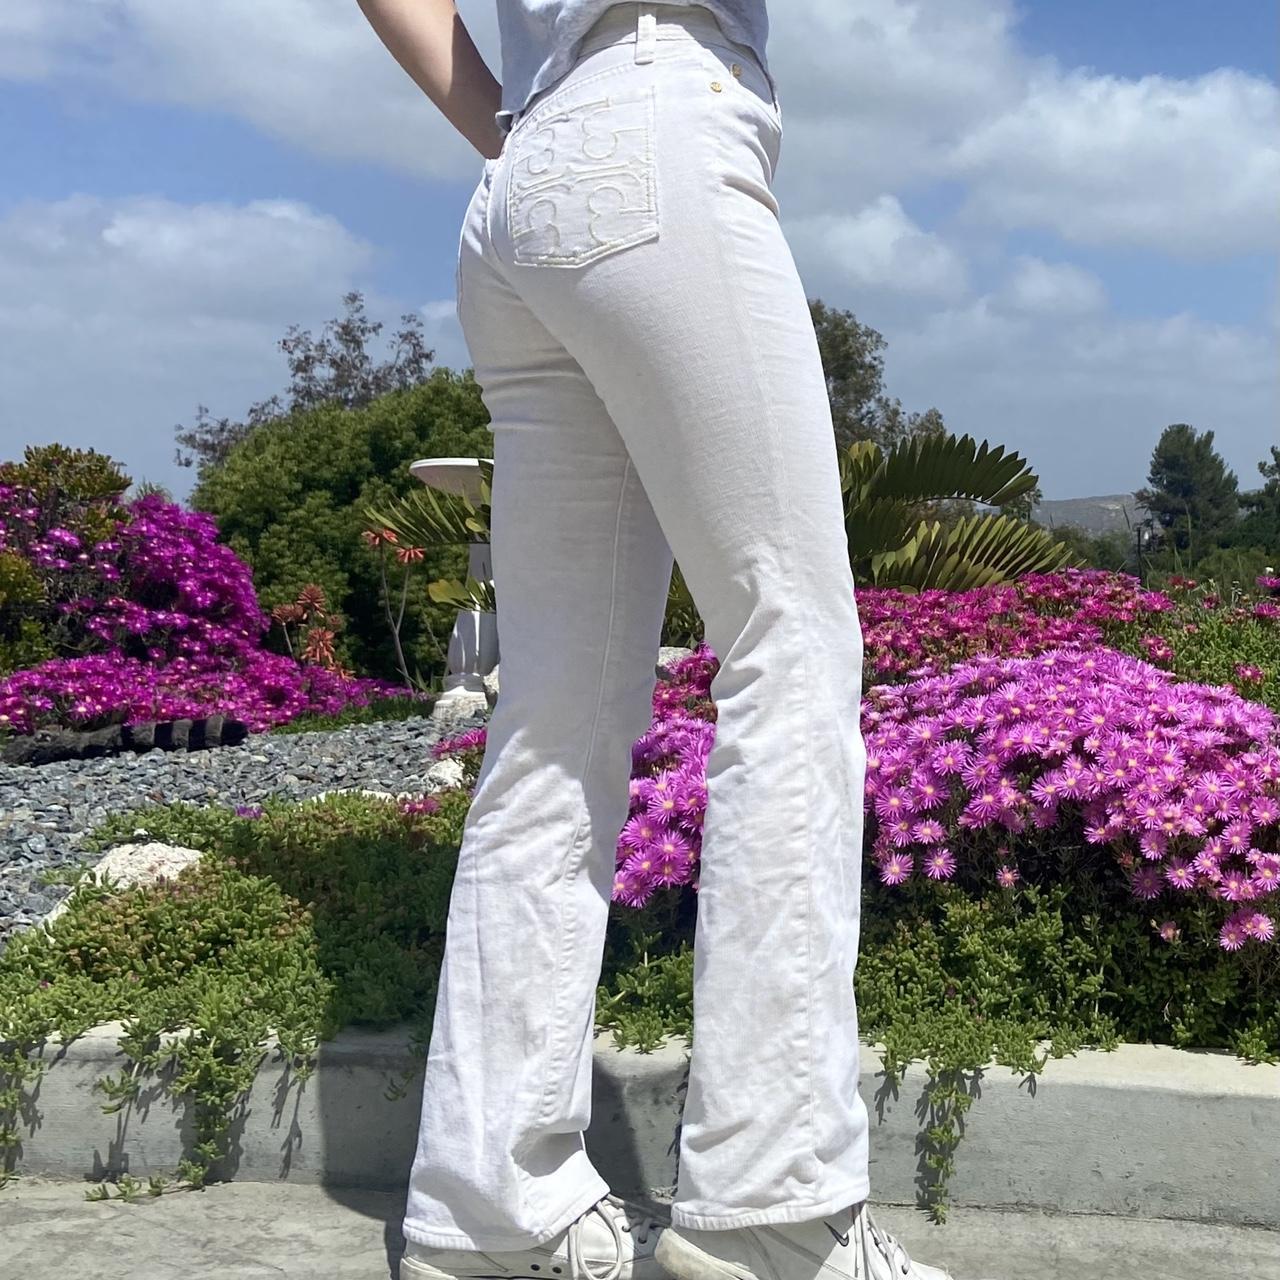 Tory Burch Women's White and Gold Trousers | Depop